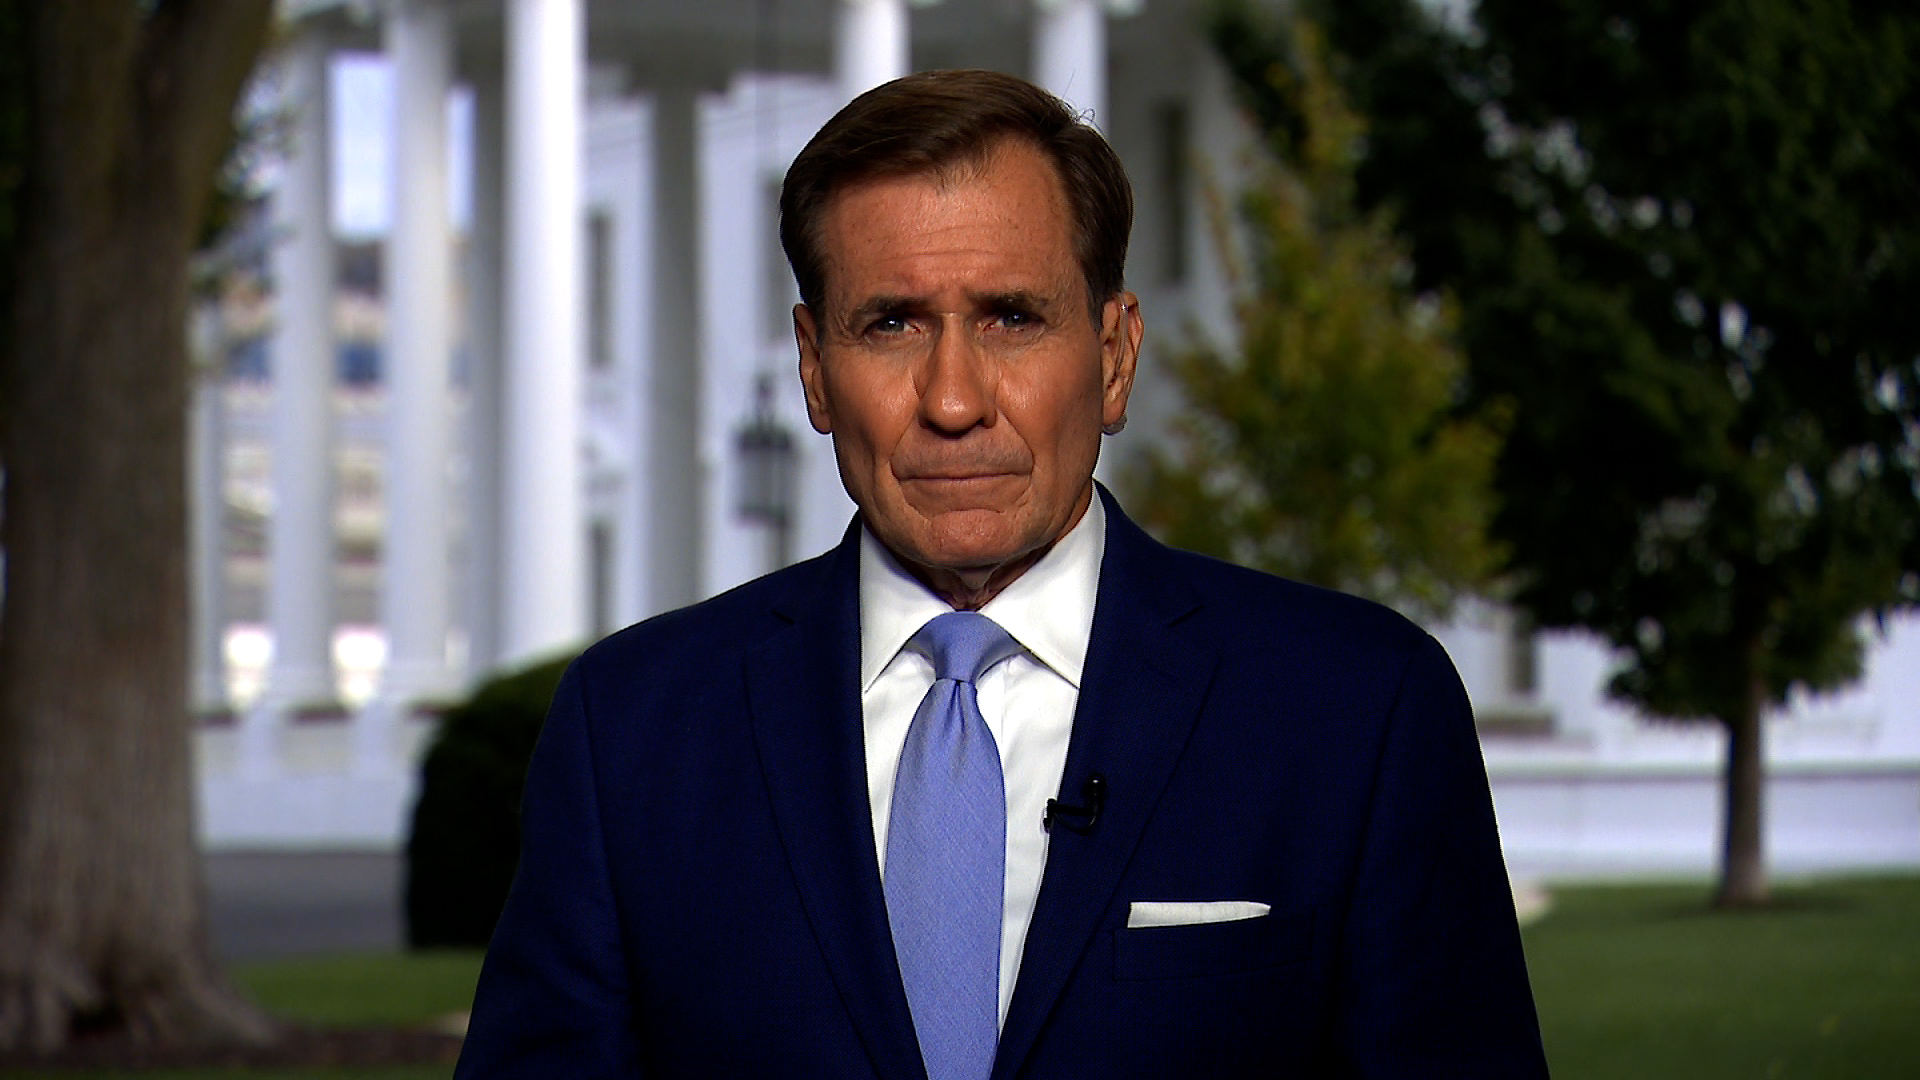 John Kirby in an interview with CNN on Monday, October 9.